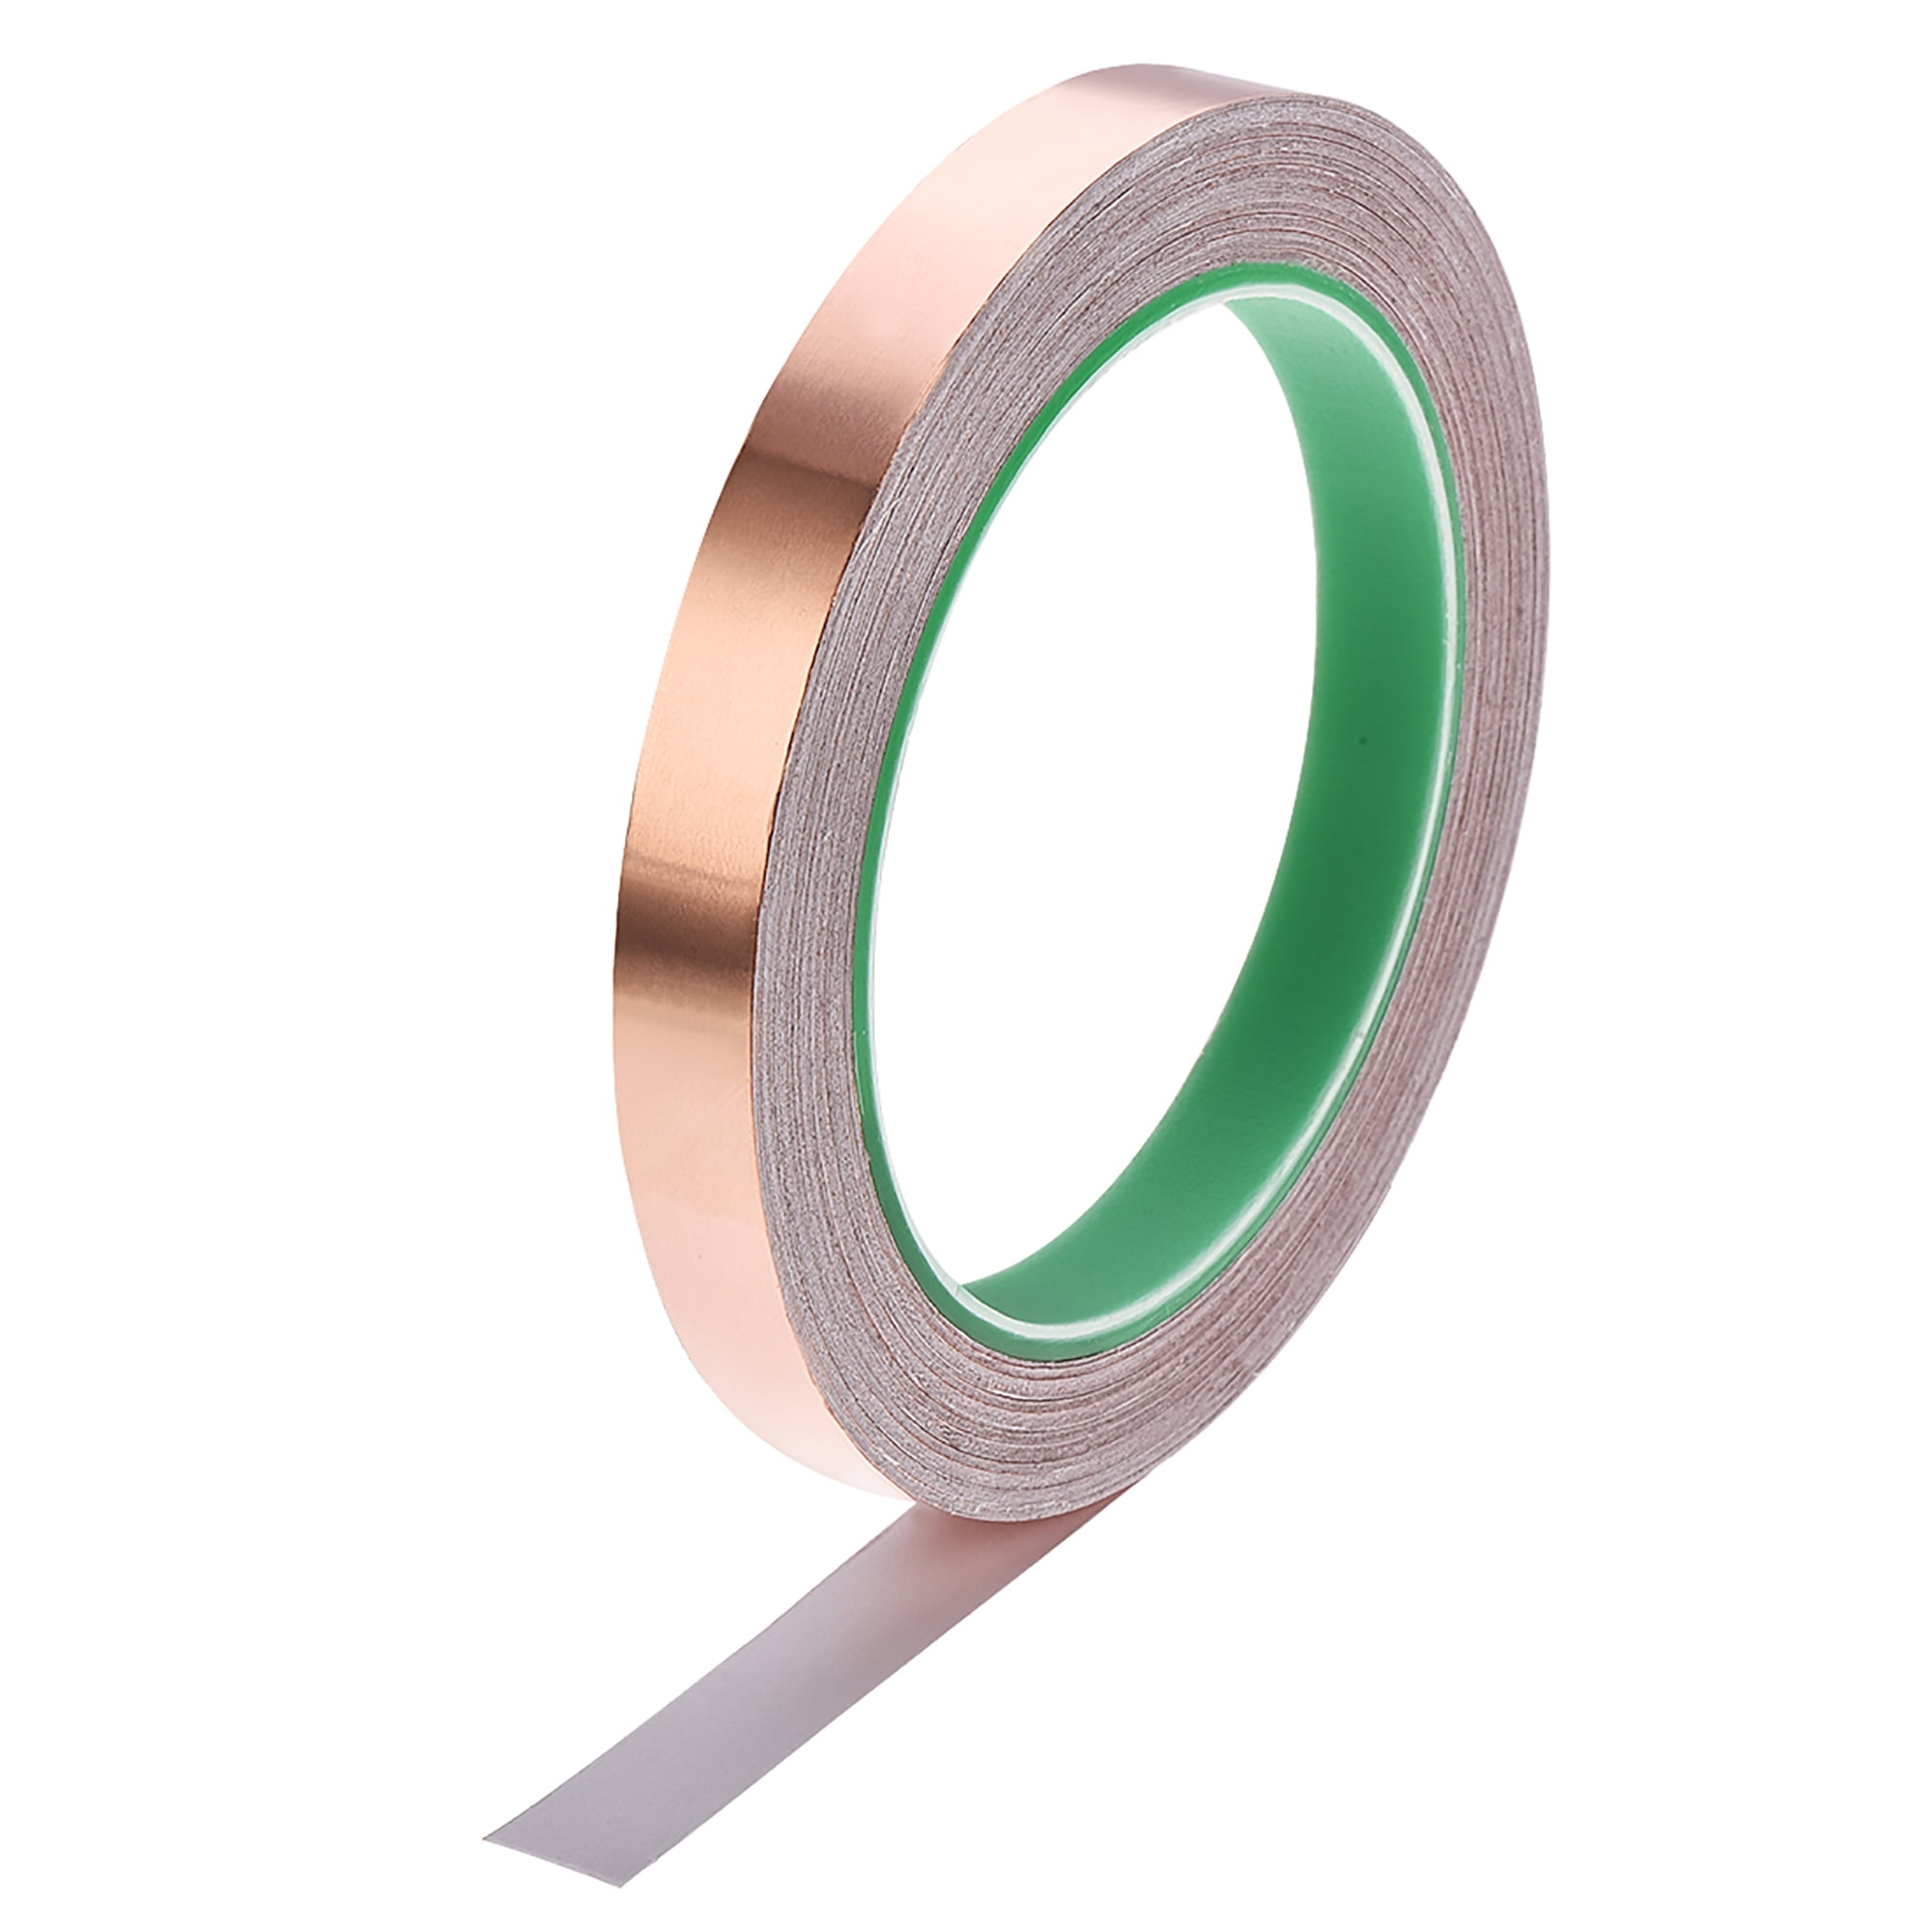 Double sided conductive copper tape for SEM / FIB applications